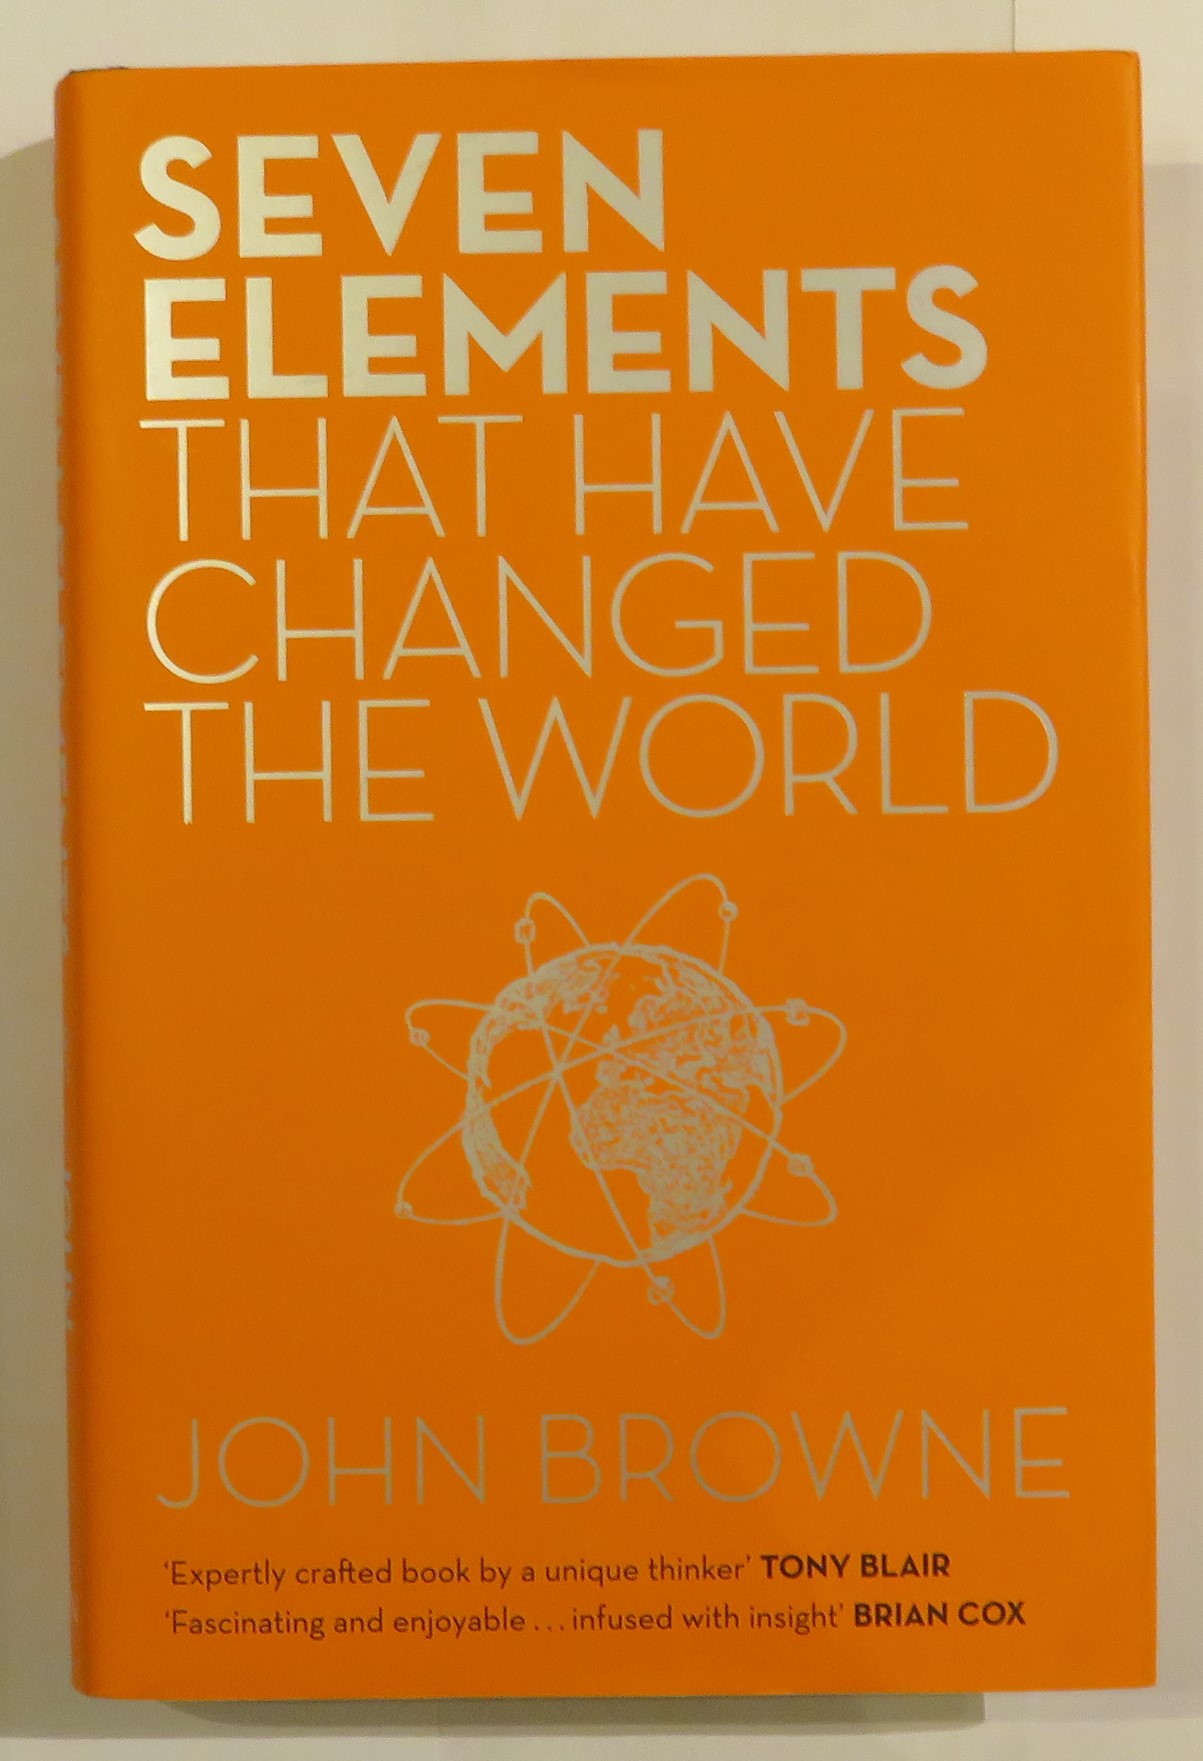 Seven Elements that have Changed the World